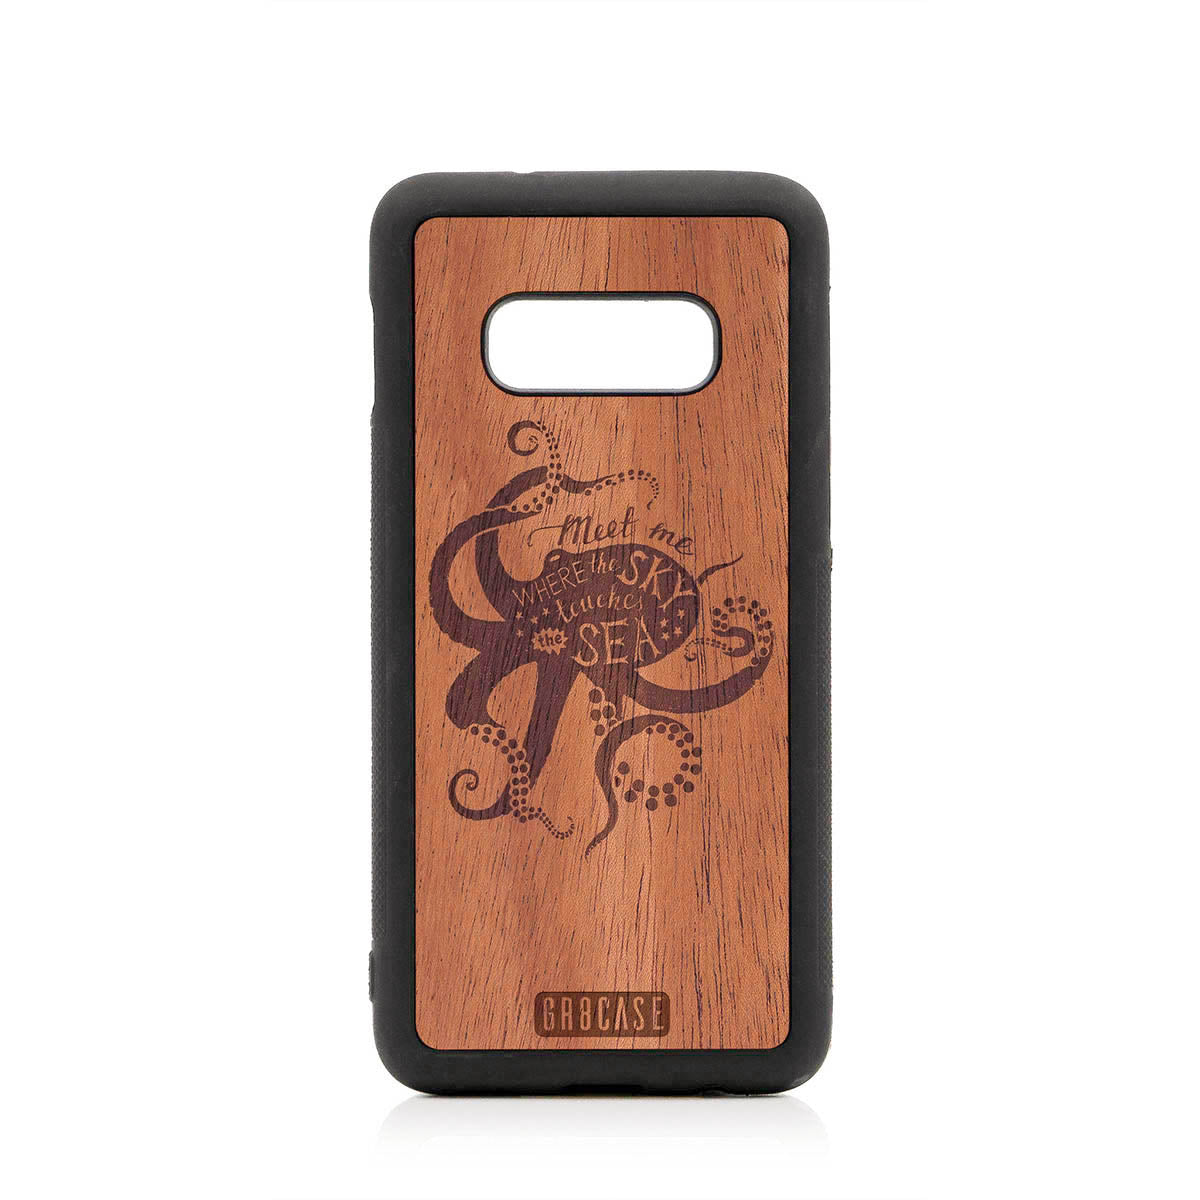 Meet Me Where The Sky Touches The Sea (Octopus) Design Wood Case For Samsung Galaxy S10E